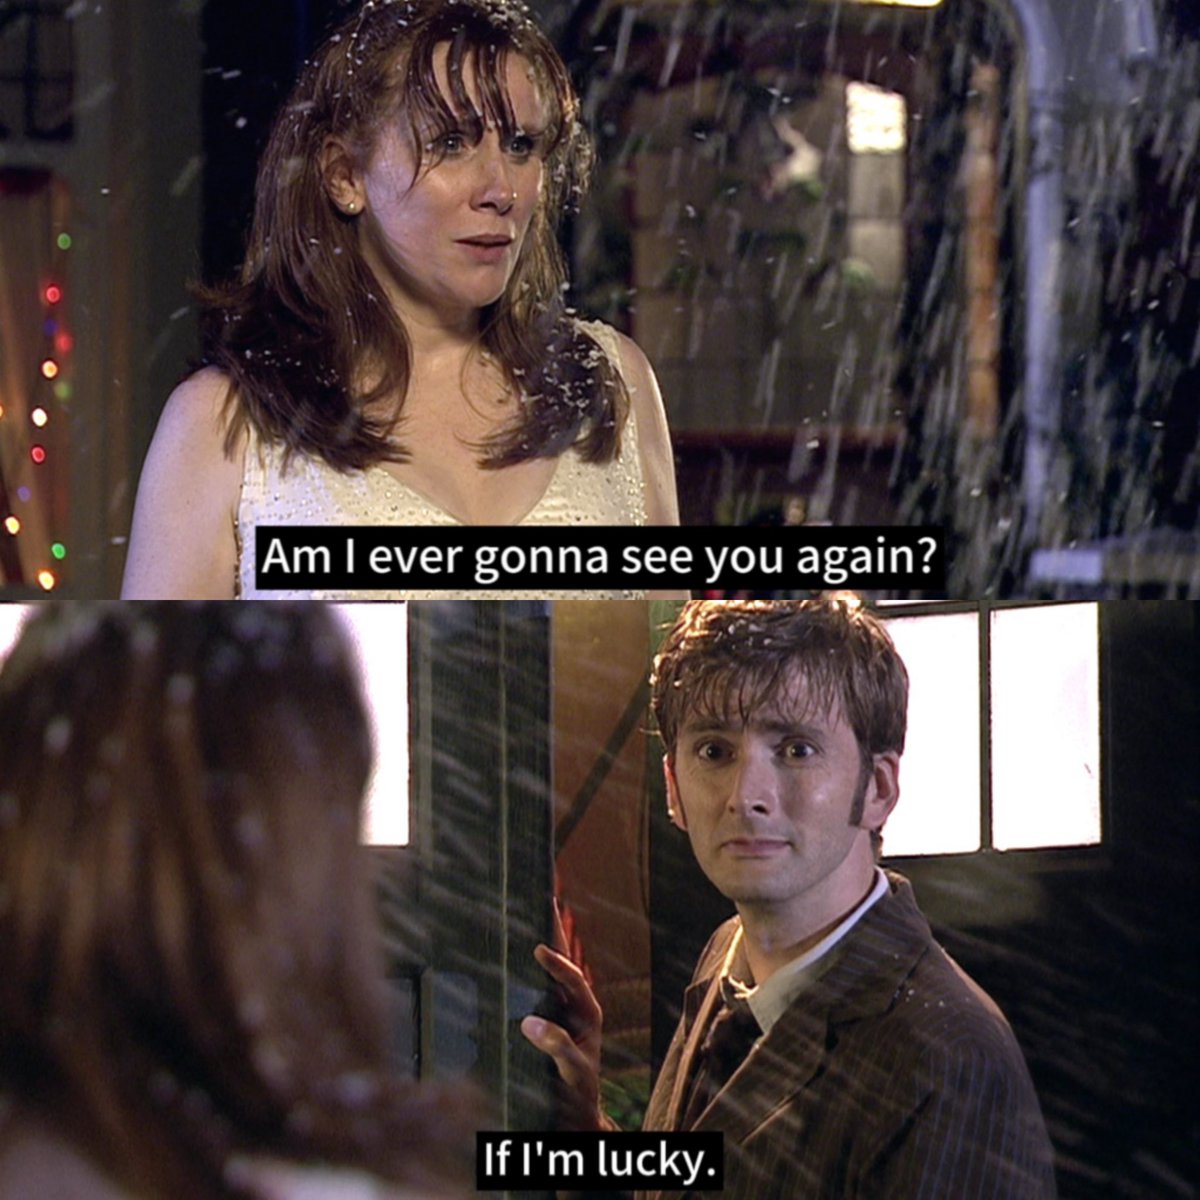 “If I’m lucky.” ❤️
#DoctorWho #10thDoctor #DavidTennant #DonnaNoble #CatherineTate